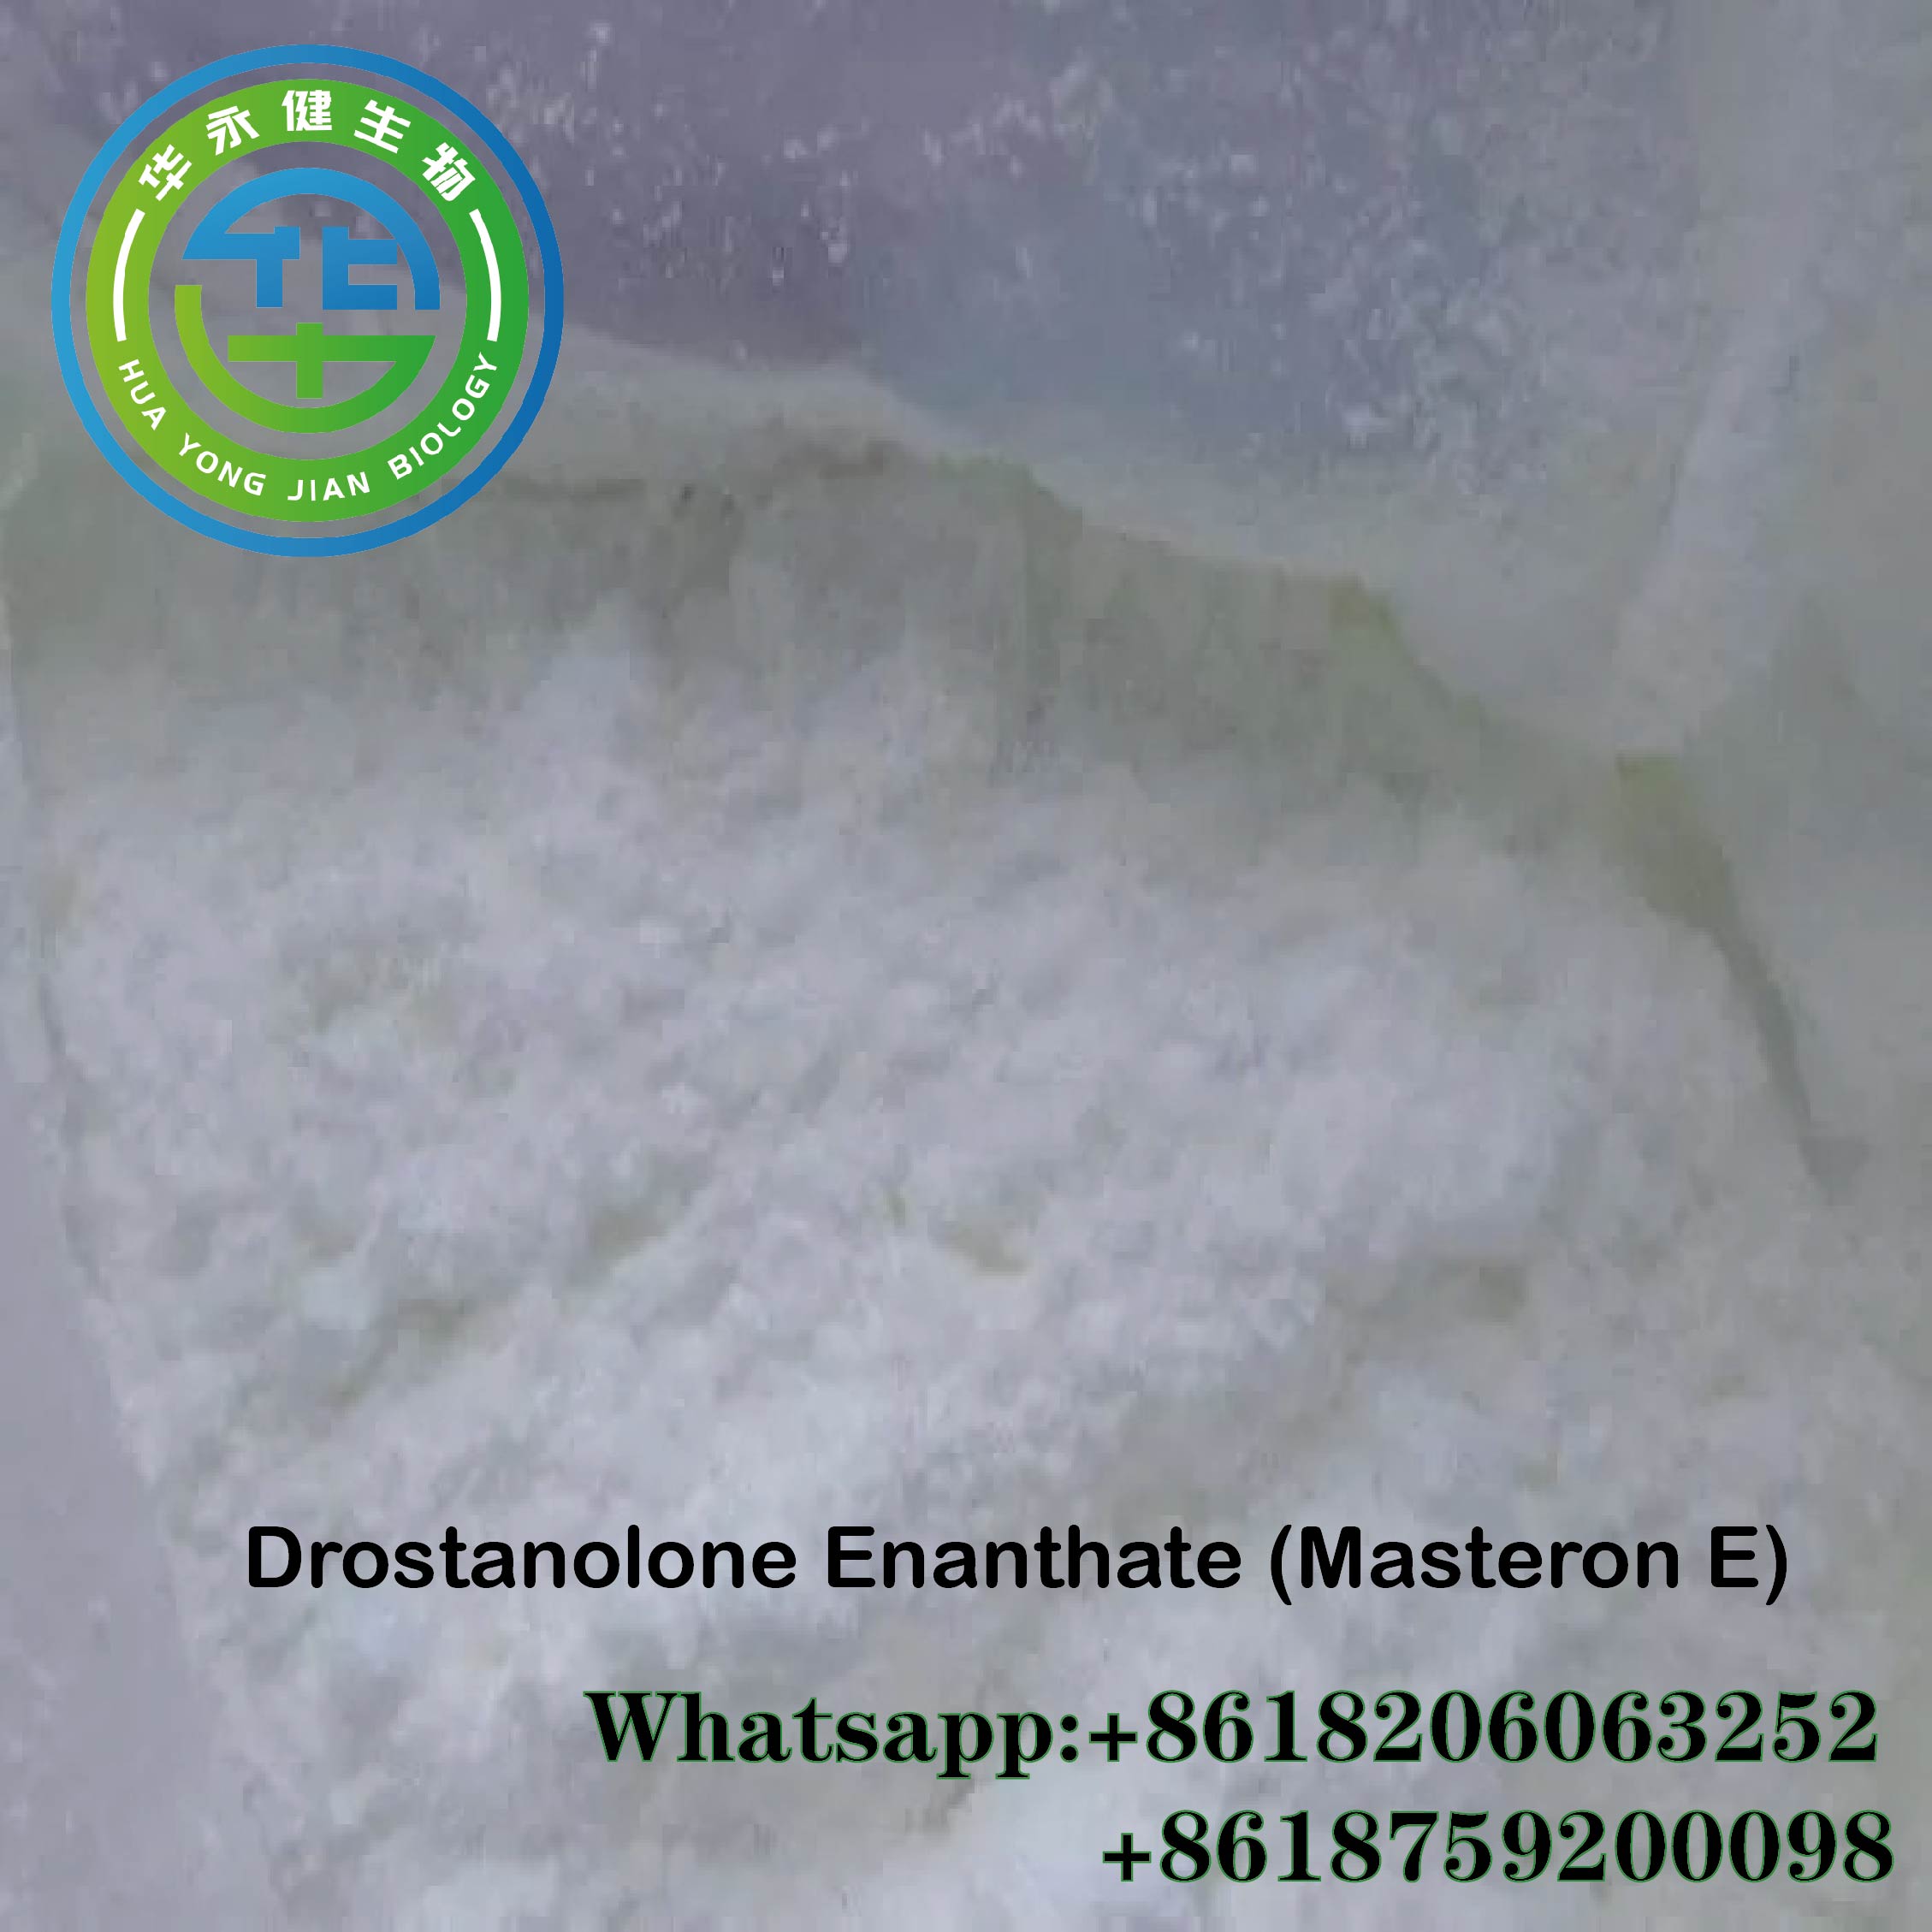 Drostanolone Enanthate Raw Powder for Bodybuiler Supplement Masteron E Safe Delivery Raw Material Featured Image